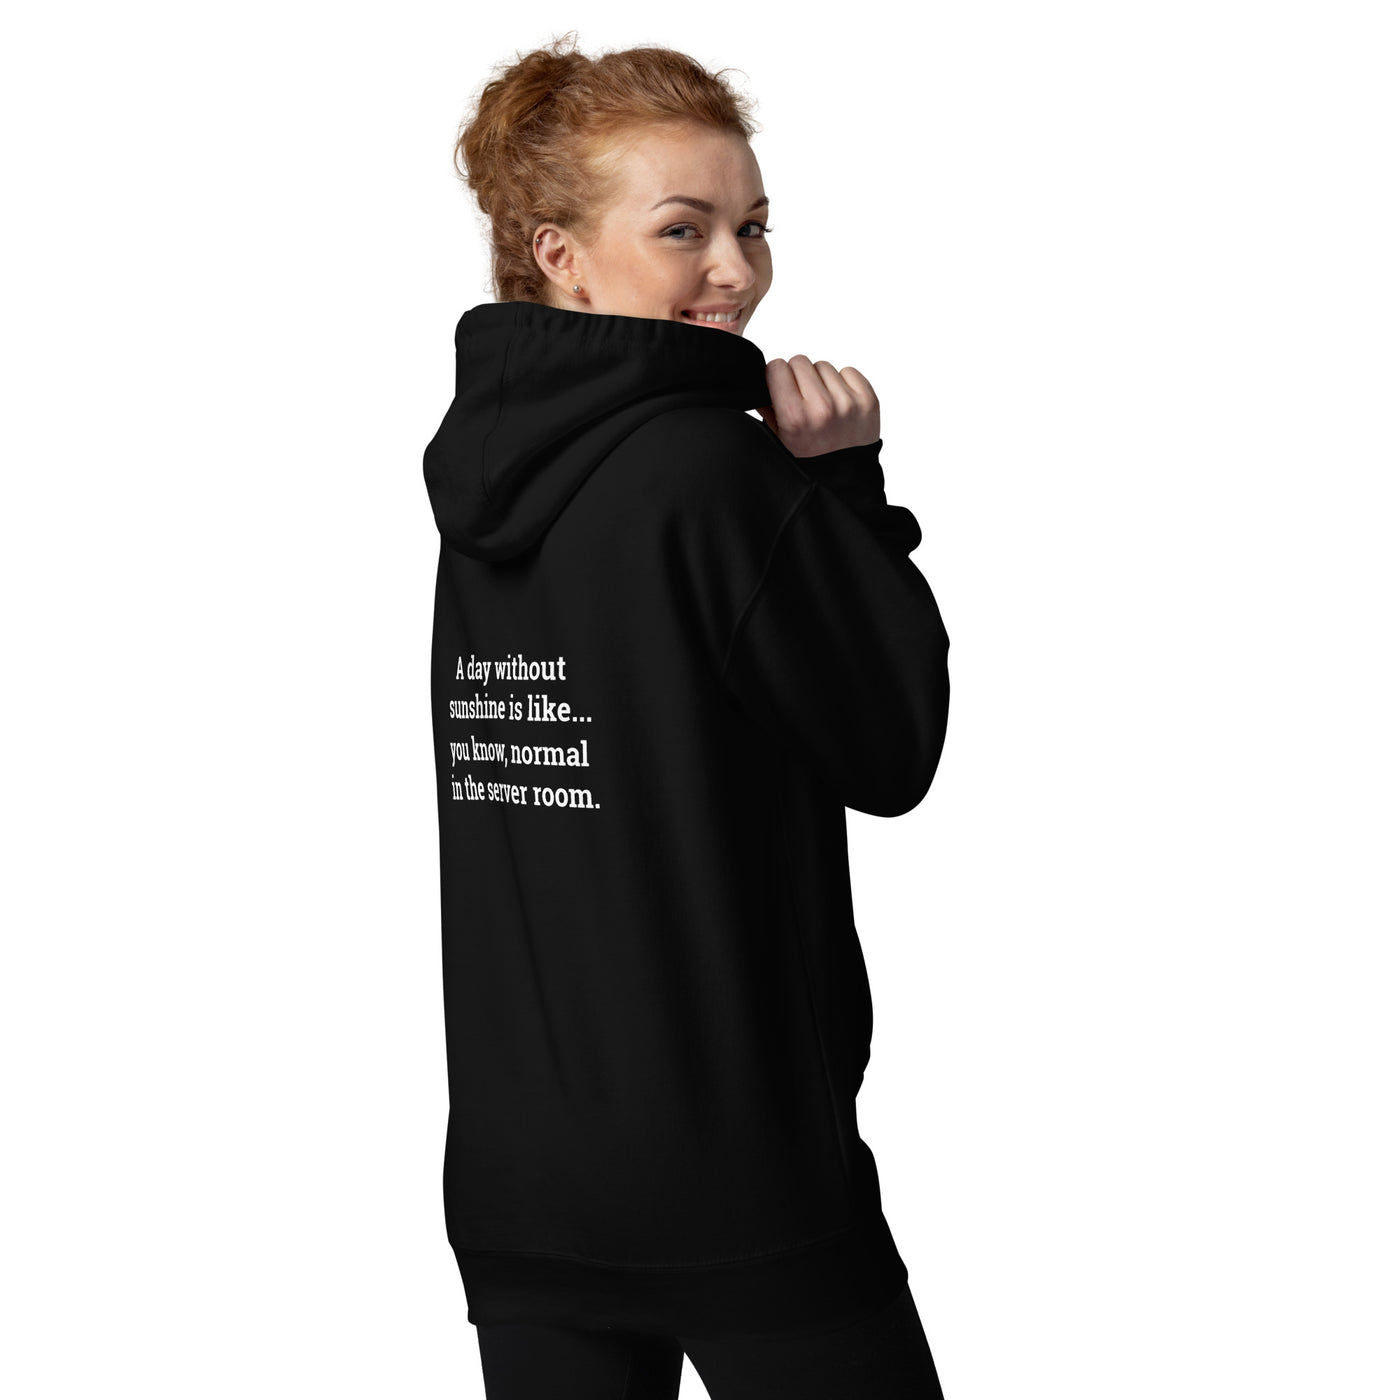 A day without sunshine is like you know, normal in the server room V2 - Unisex Hoodie ( Back Print )